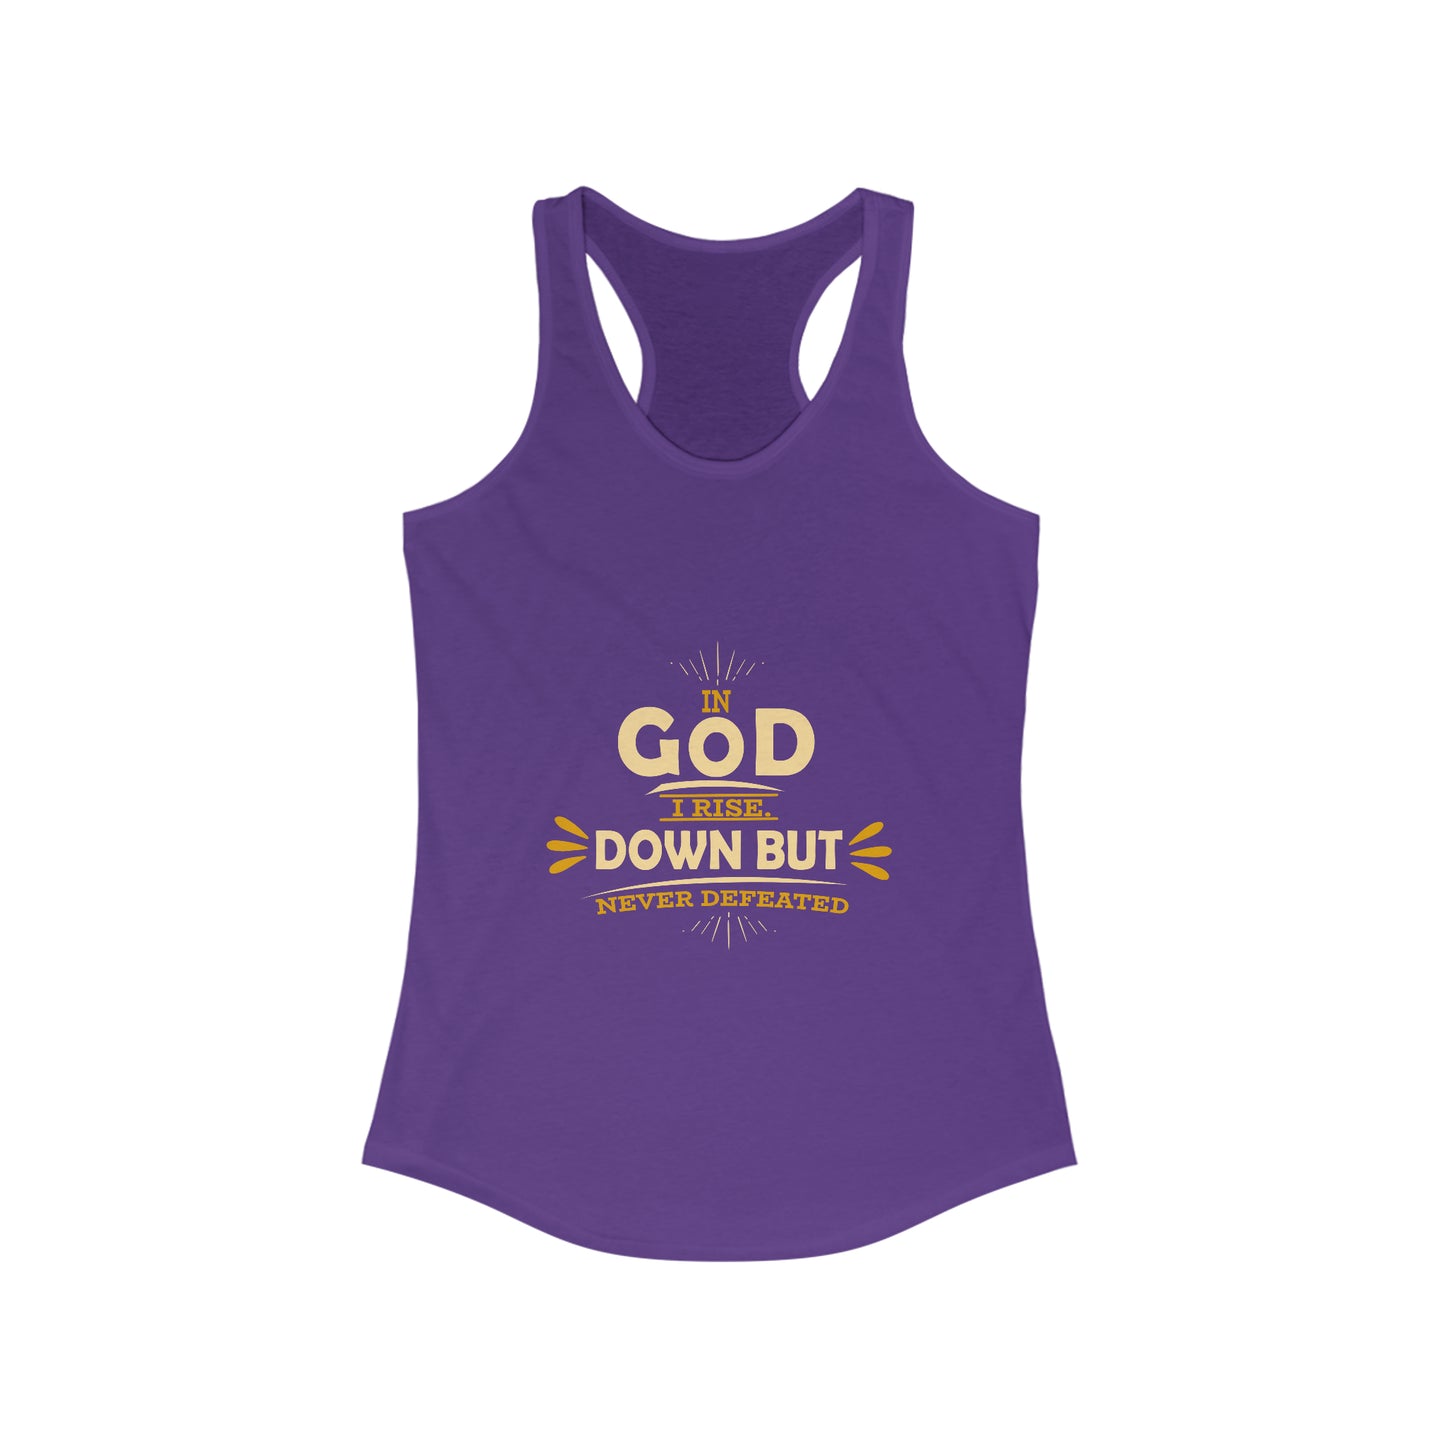 In God I Rise Down But Never Defeated  Slim Fit Tank-top